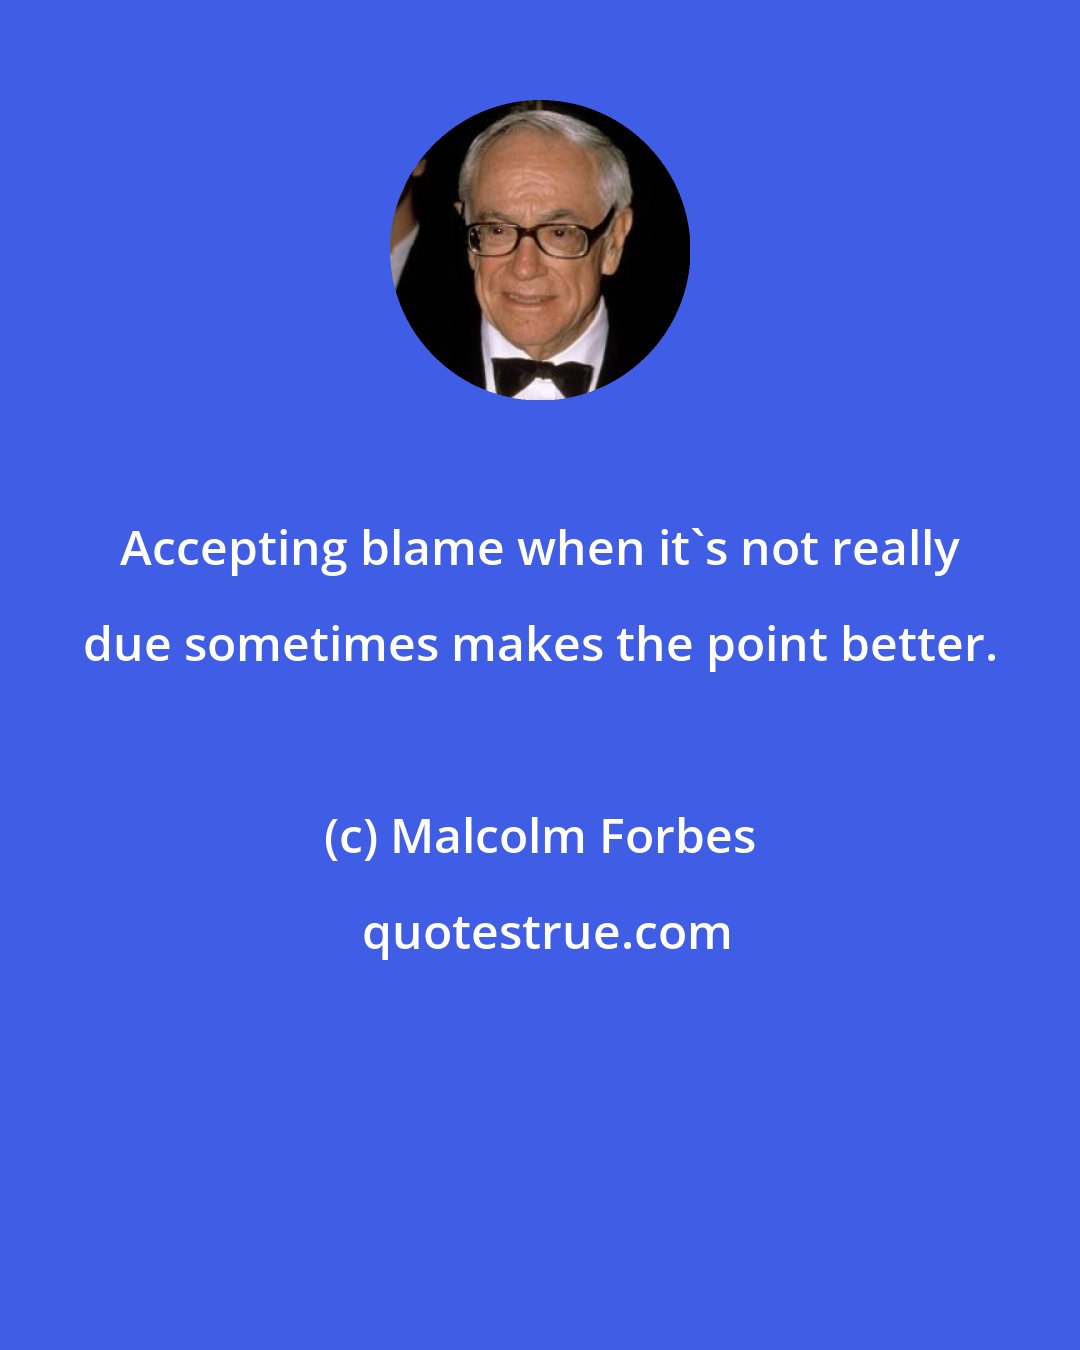 Malcolm Forbes: Accepting blame when it's not really due sometimes makes the point better.